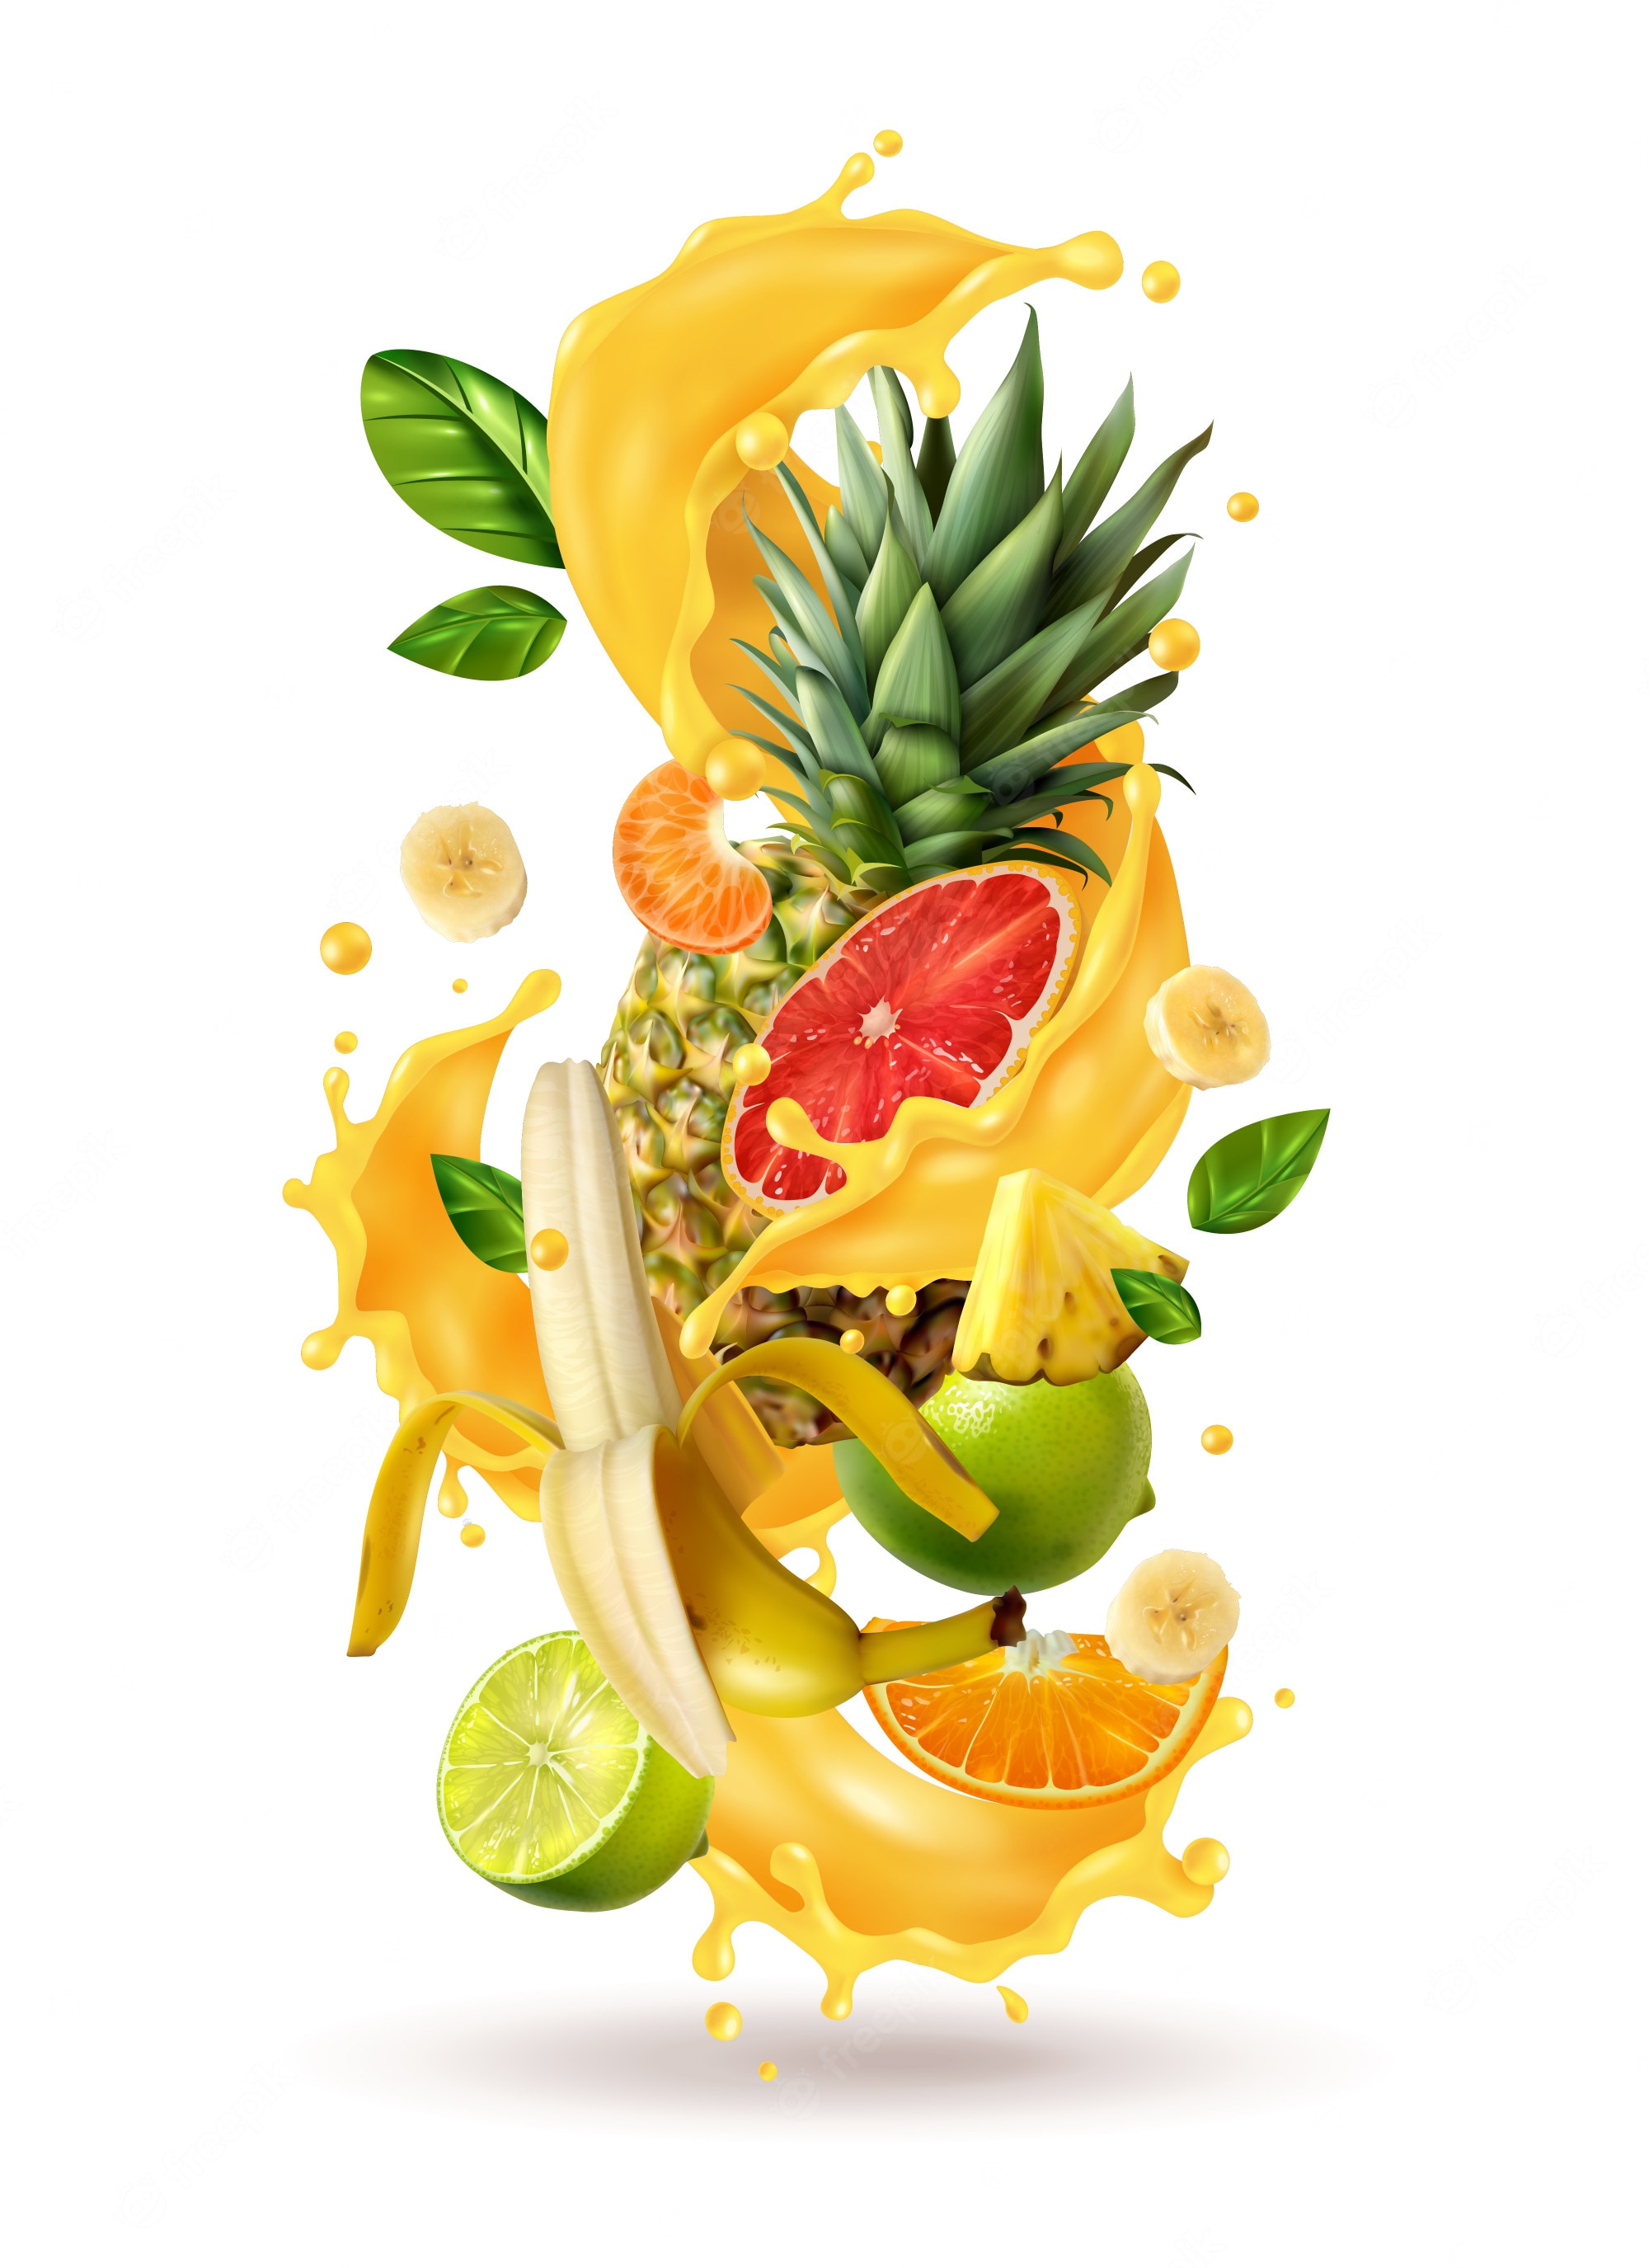 Fruit drink images free vectors stock photos psd